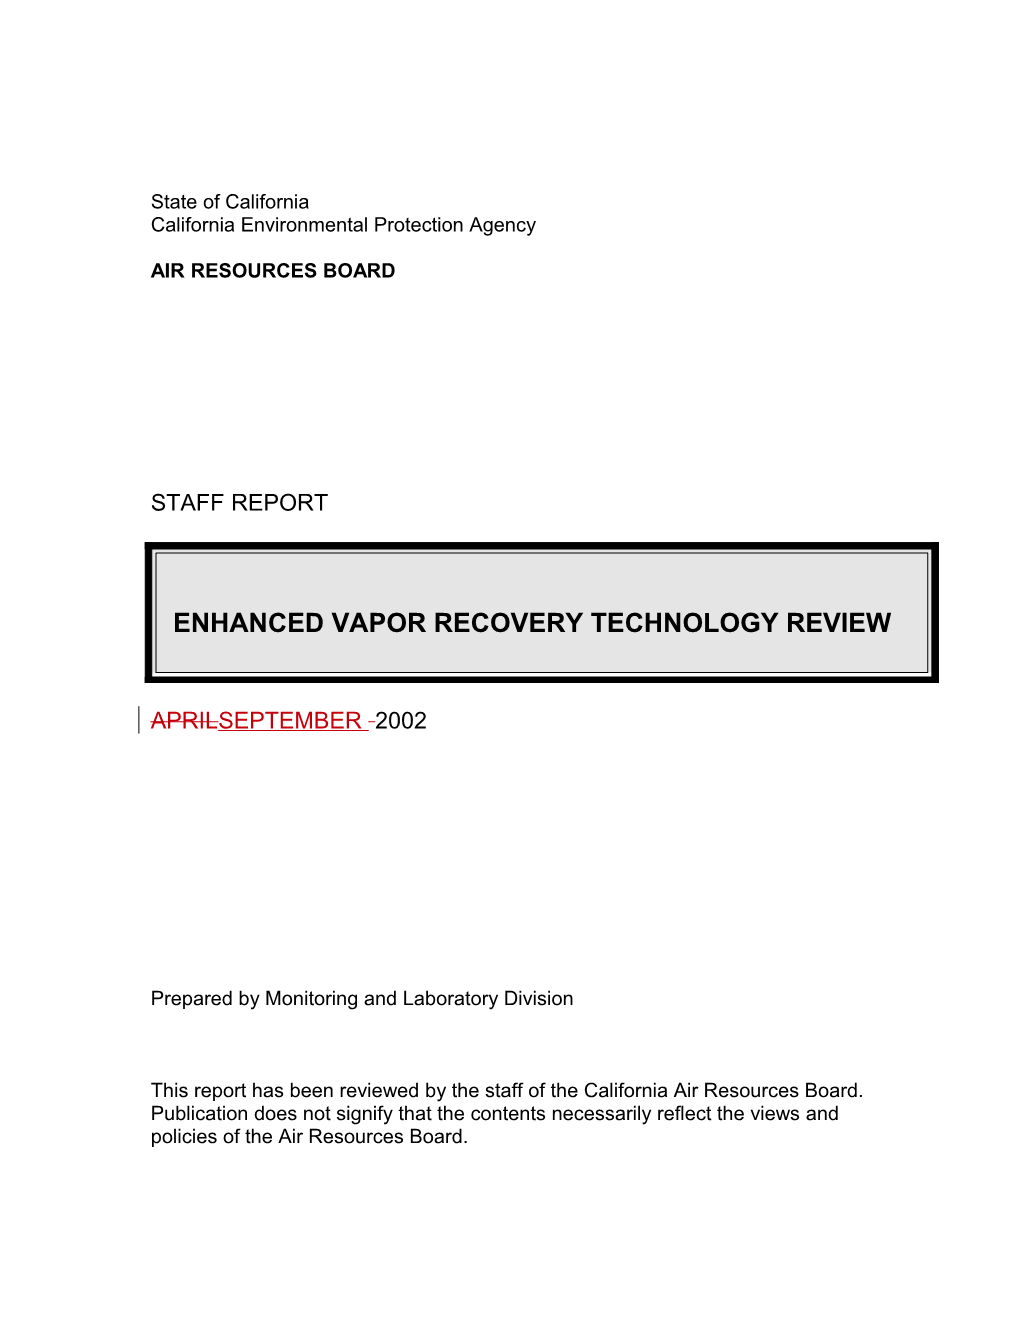 Staff Report: 2002-09-06 Enhanced Vapor Recovery Technology Review Strike and Add